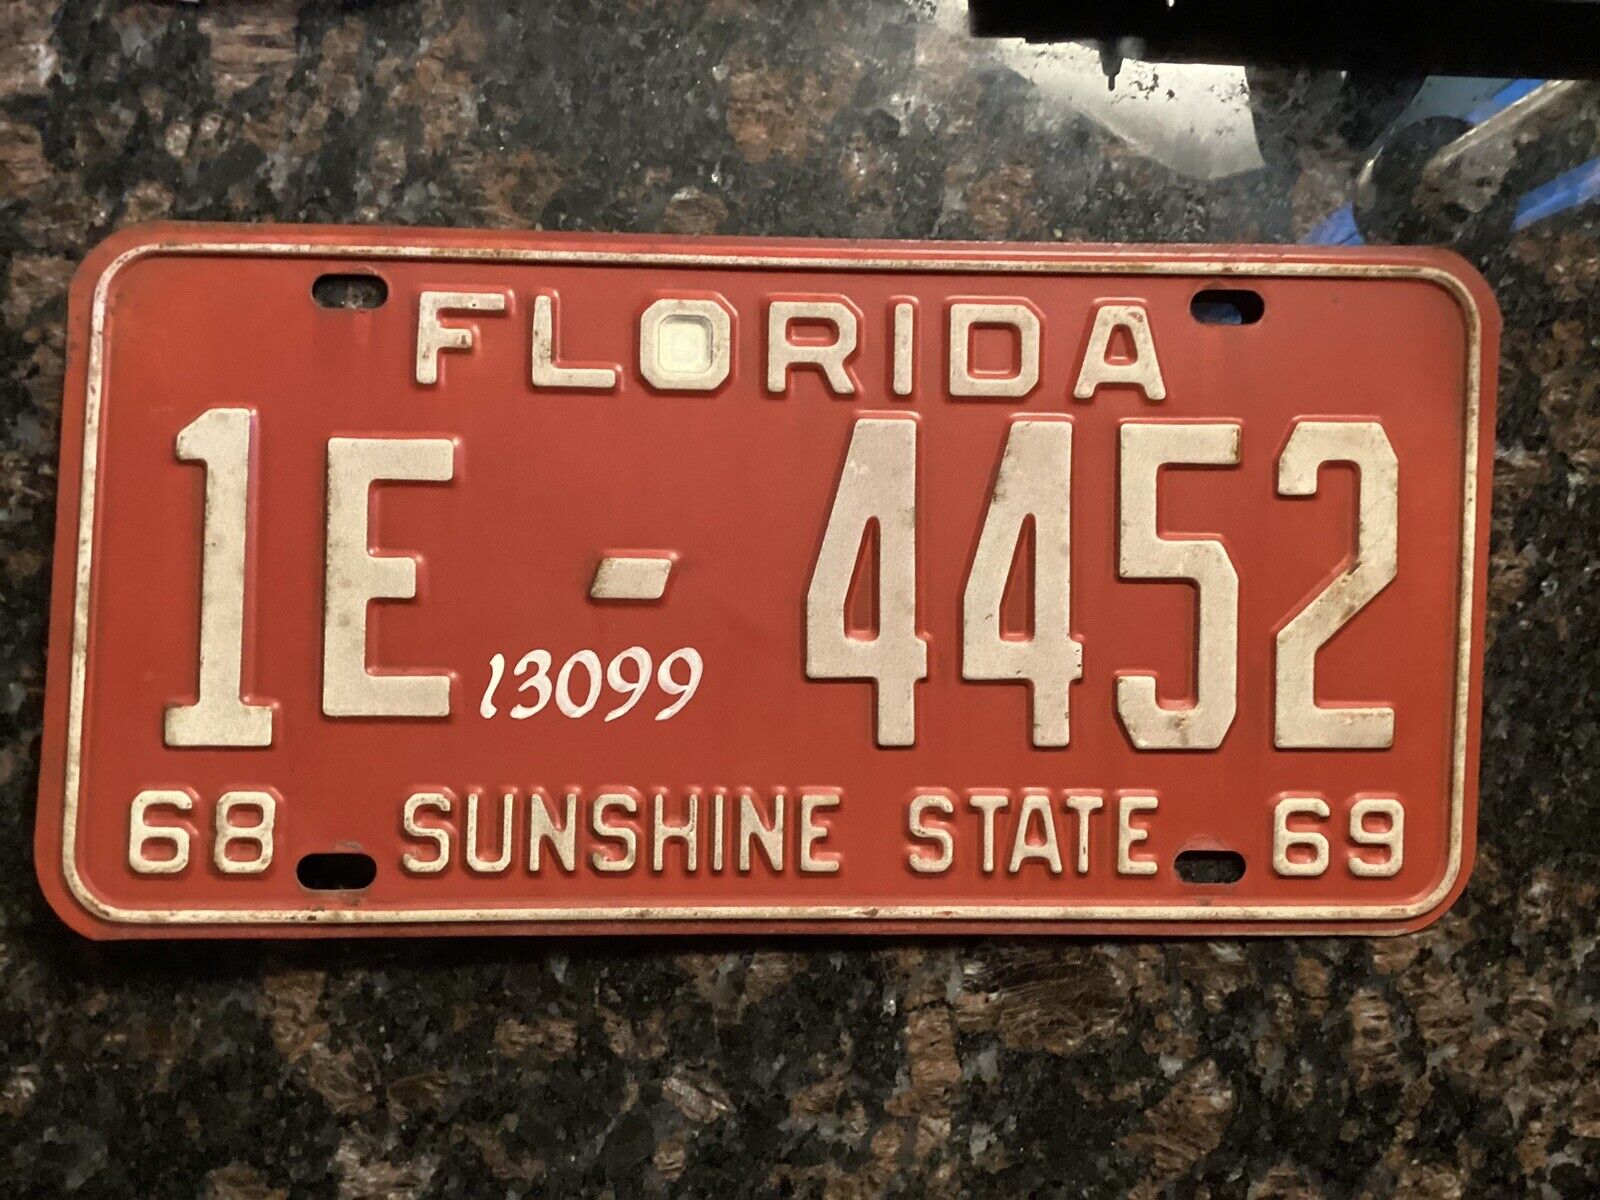 Florida License Plate 1968 1969 Dade Miami 1E-4452 Available For Registration